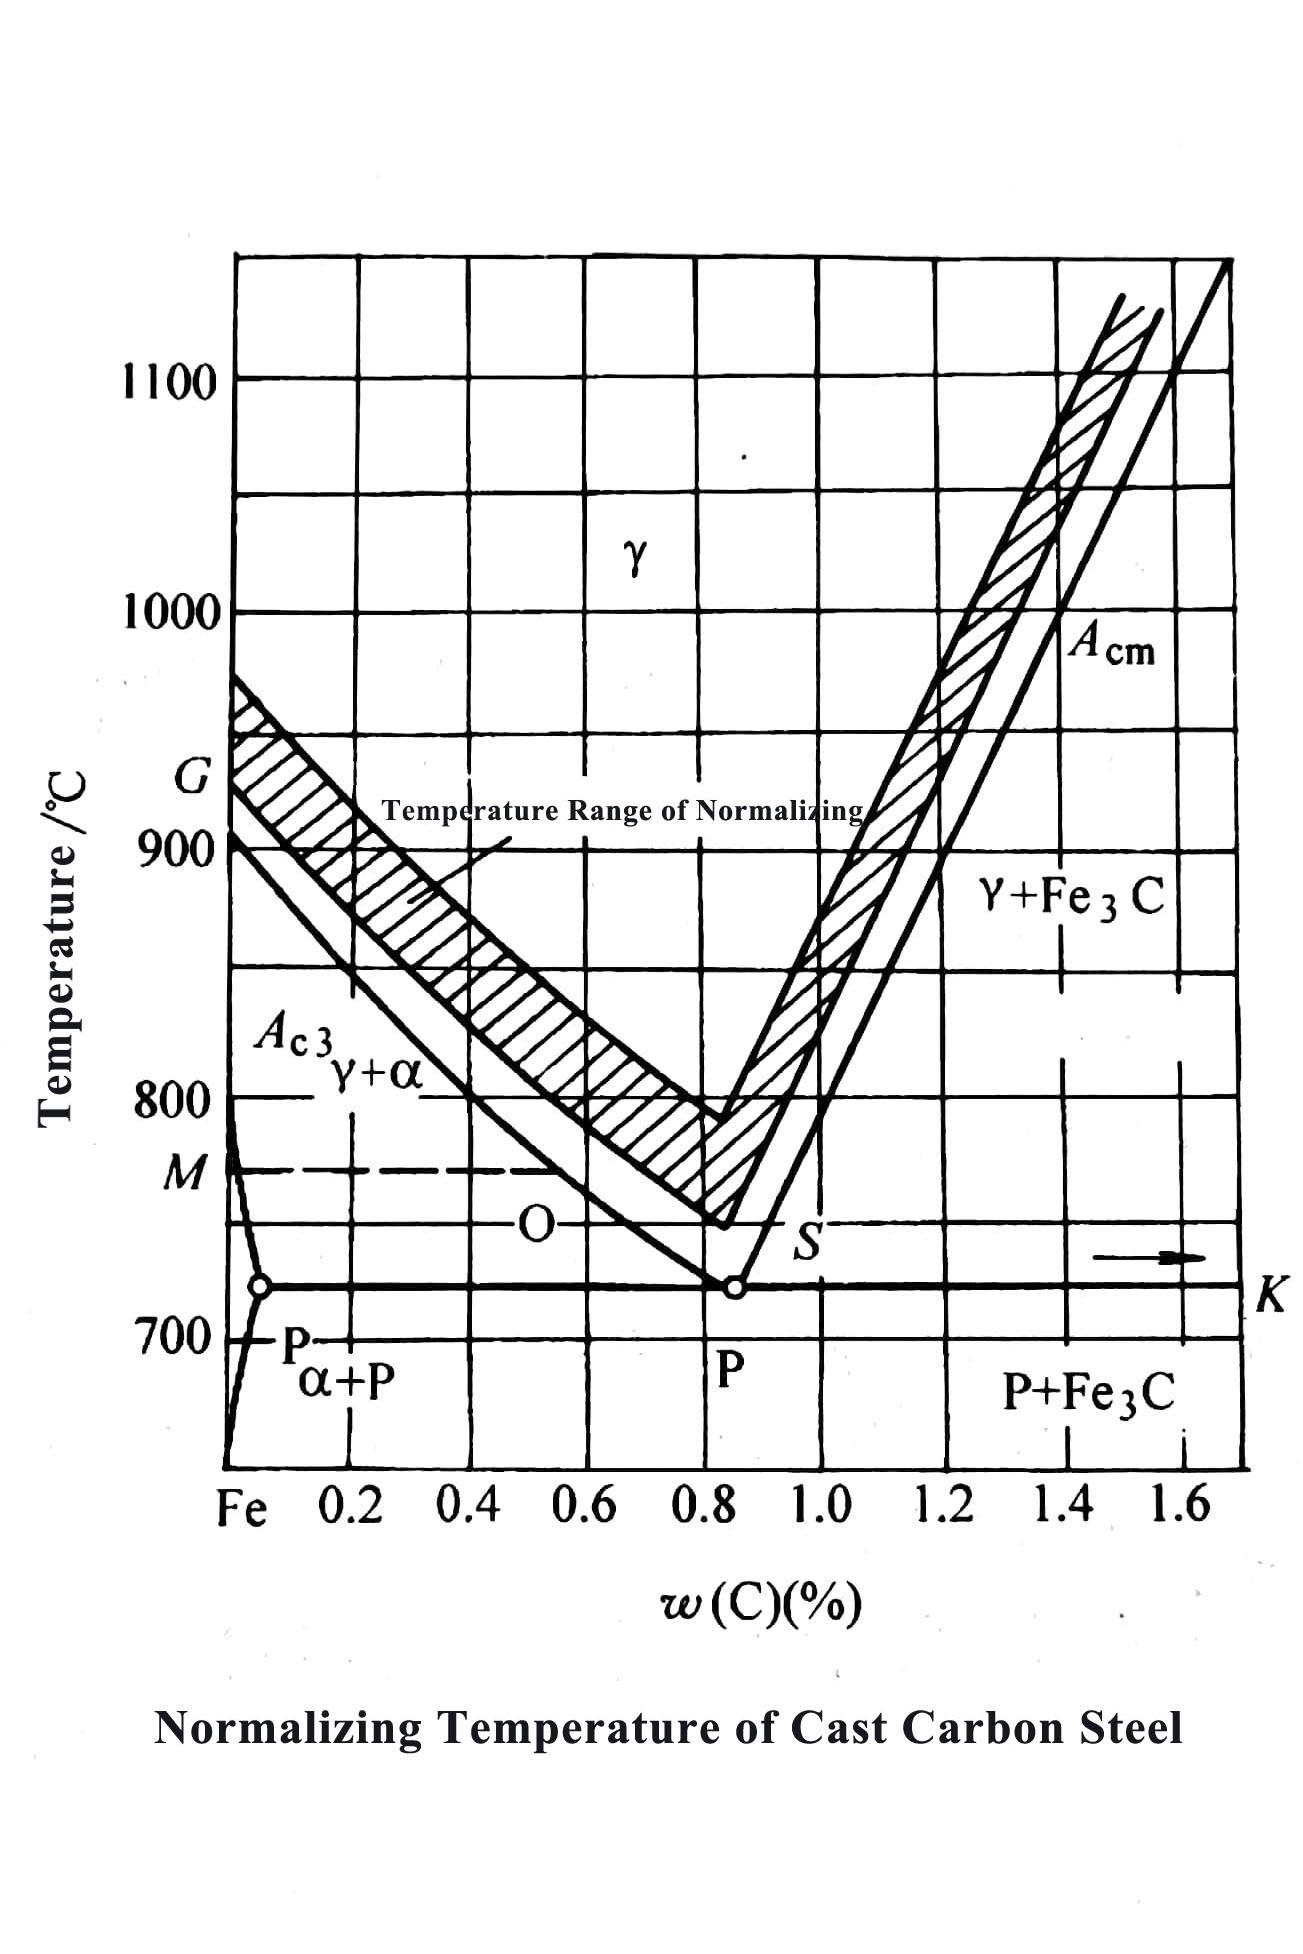 Normalizing Temperature of Cast Carbon Steel